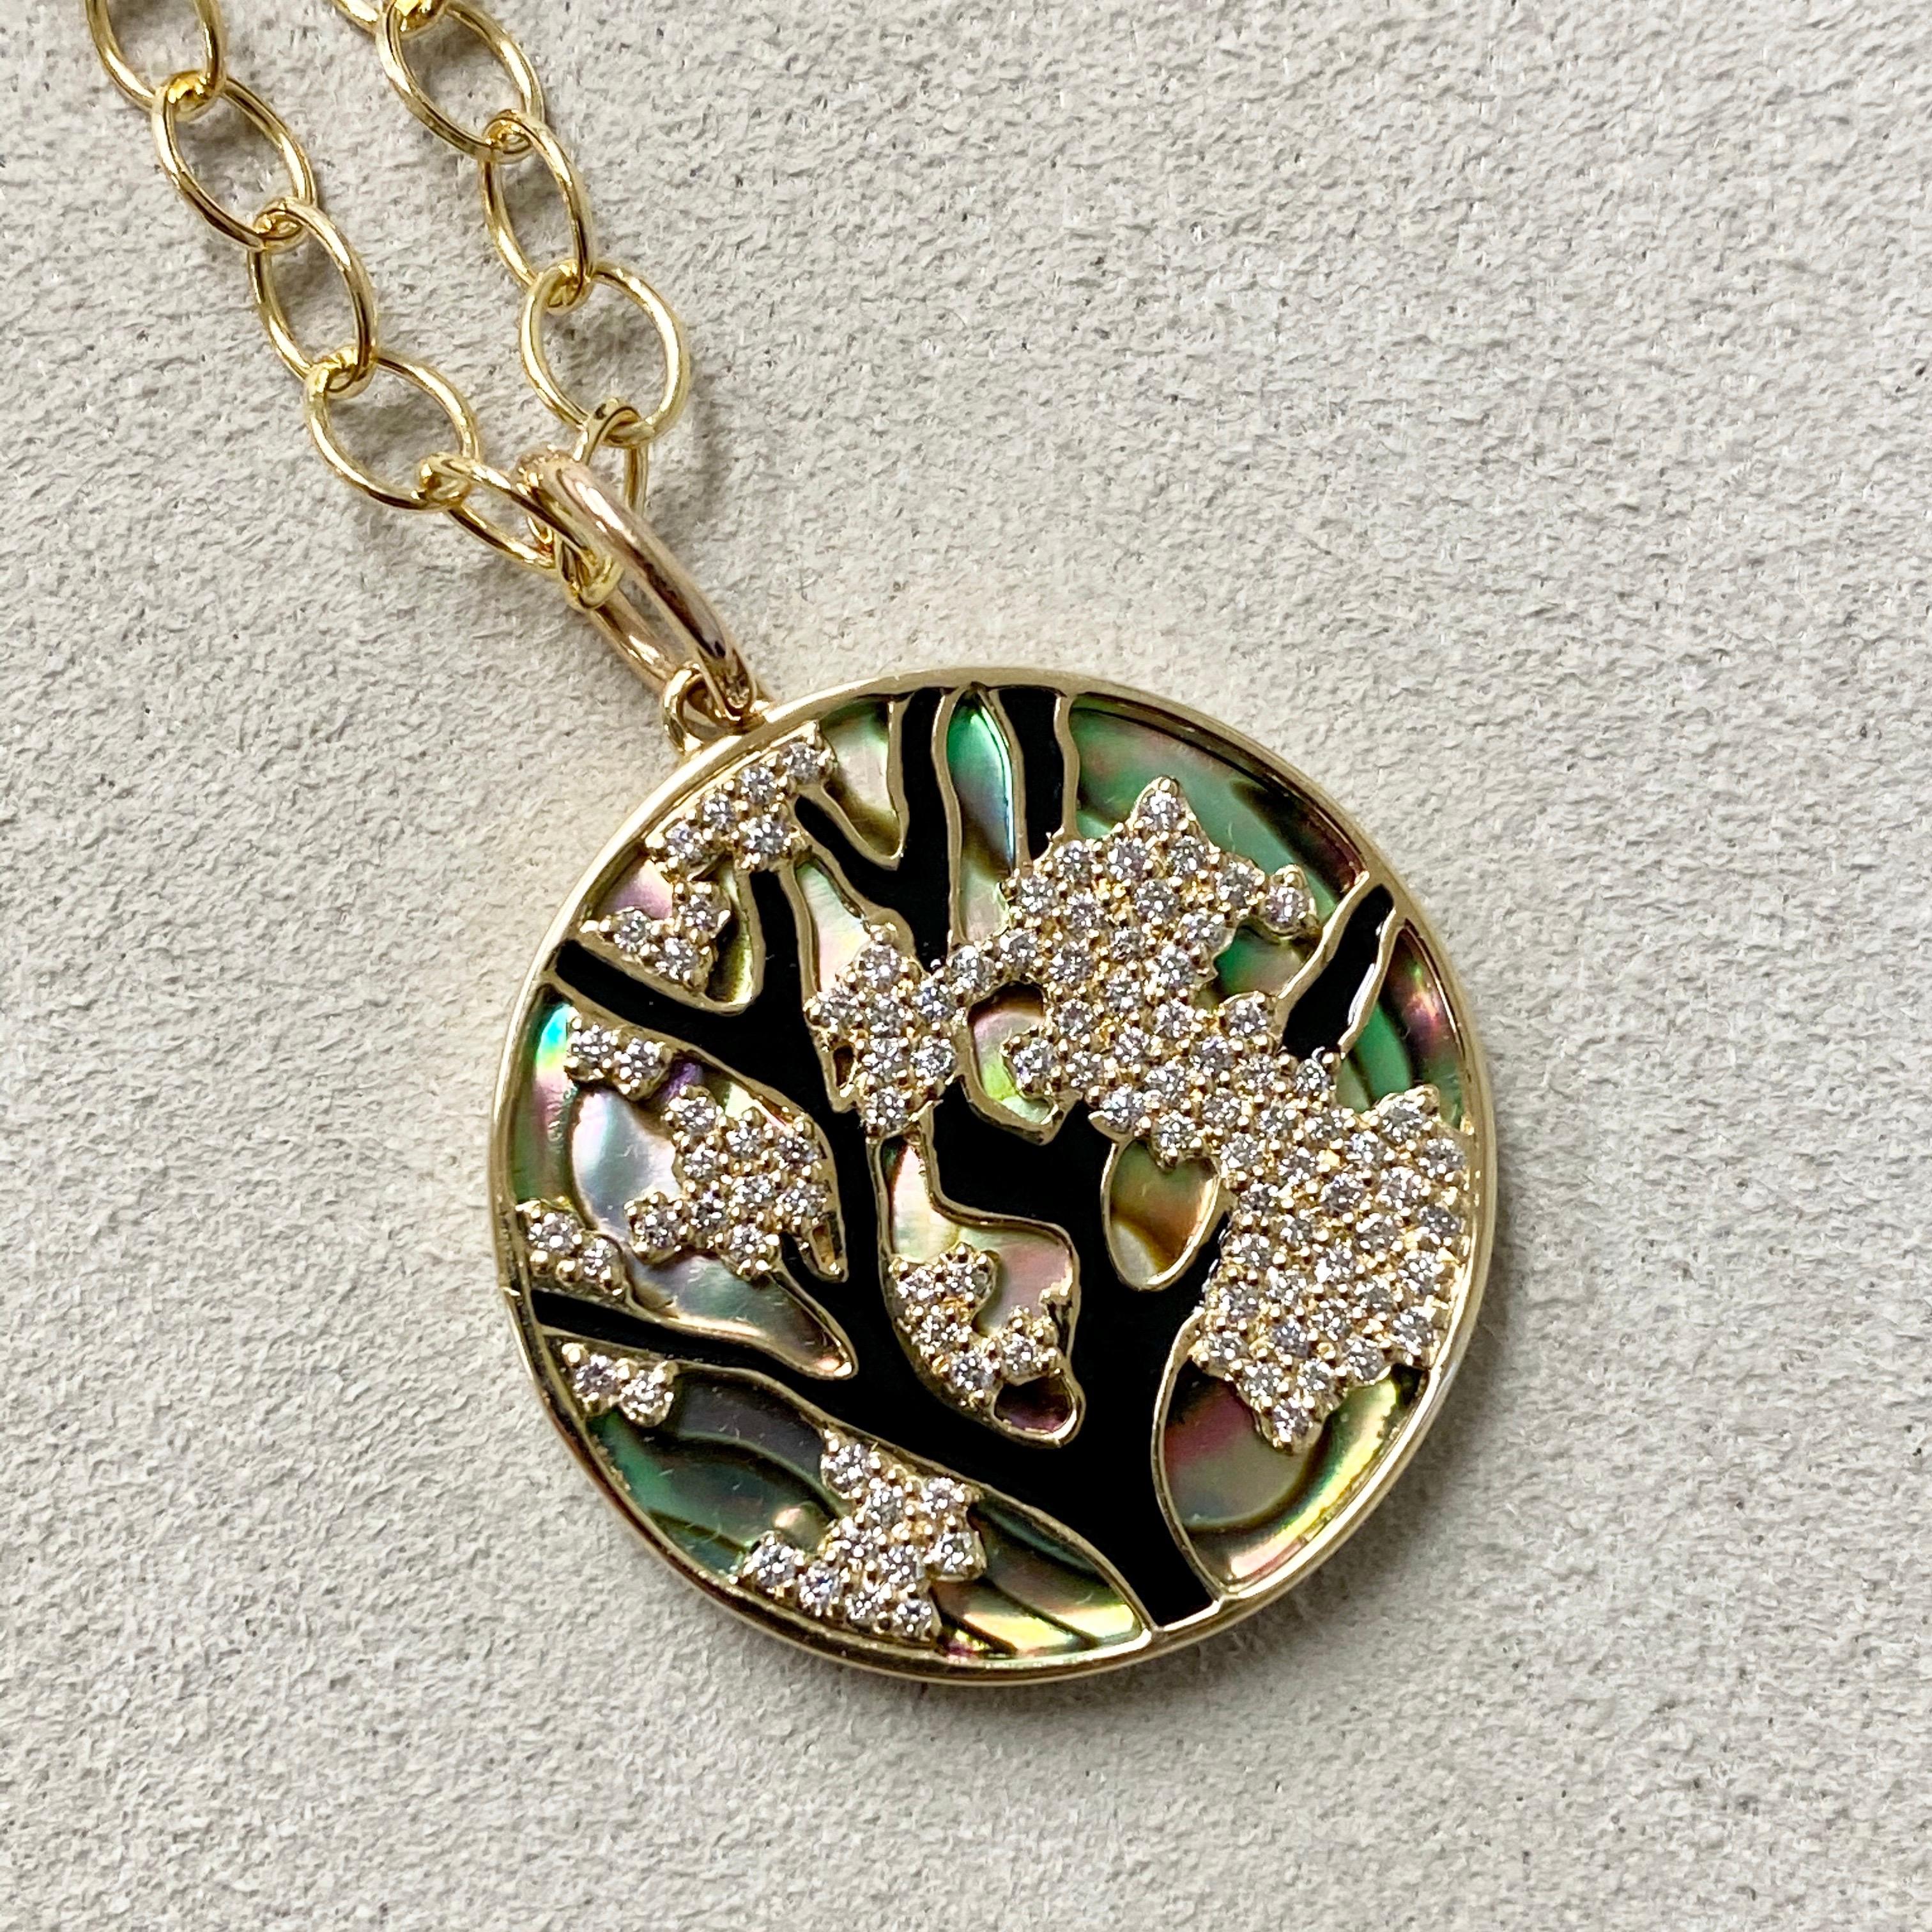 Created in 18 karat yellow gold
Abalone 10.5 cts approx
Champagne diamonds 0.50 ct approx
Cherry blossoms
Chain sold separately
Limited Edition

About the Designers ~ Dharmesh & Namrata

Drawing inspiration from little things, Dharmesh & Namrata